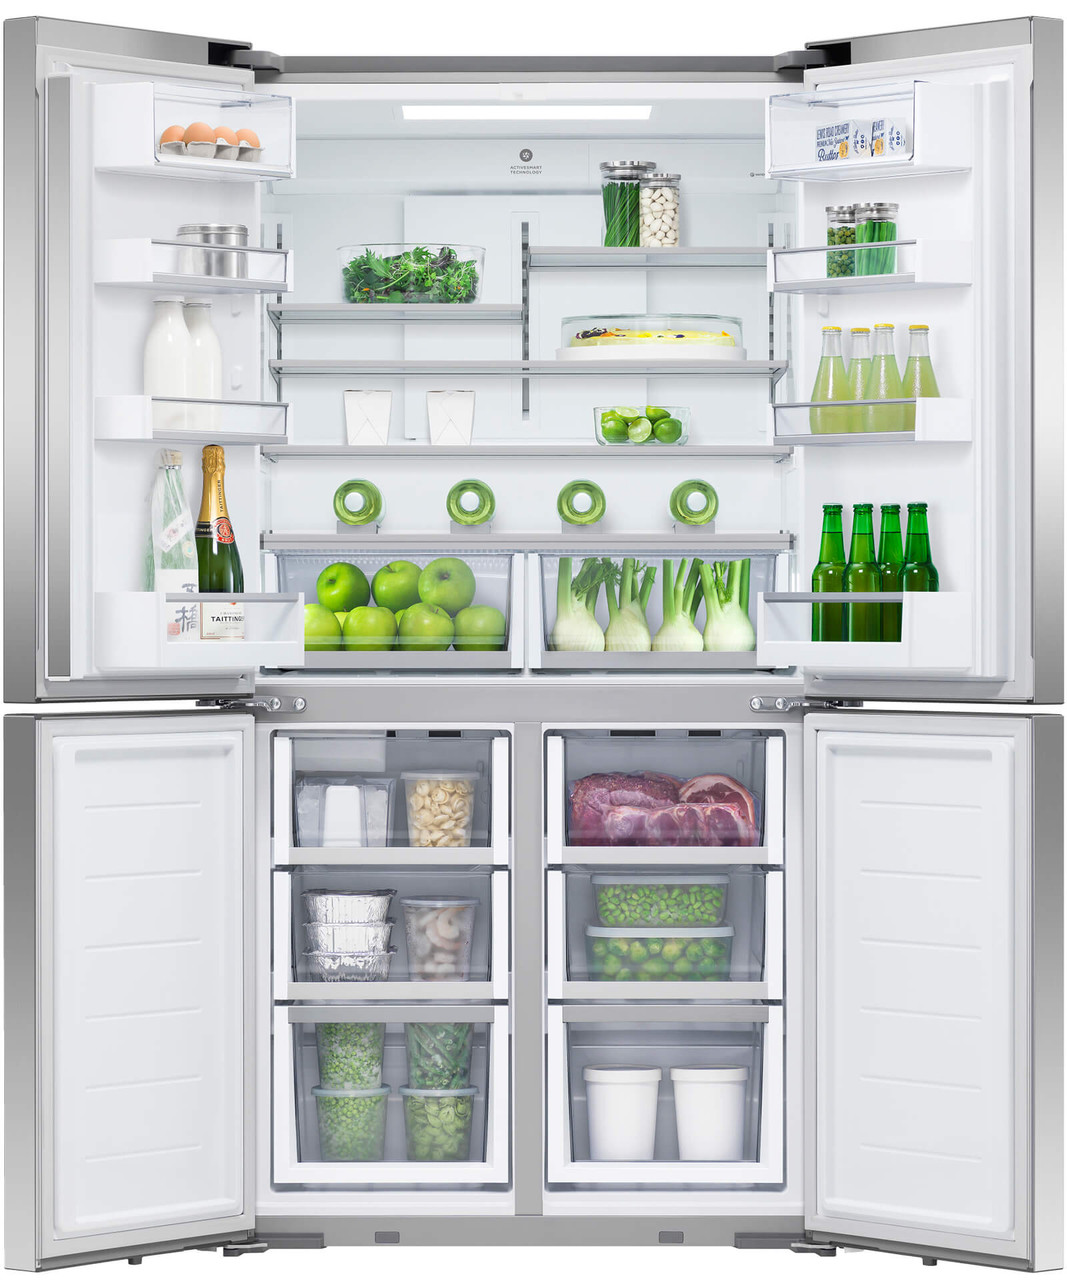 RF605QDUVX2 - 538L Quad Door Refrigerator with Ice & Water - Stainless Steel